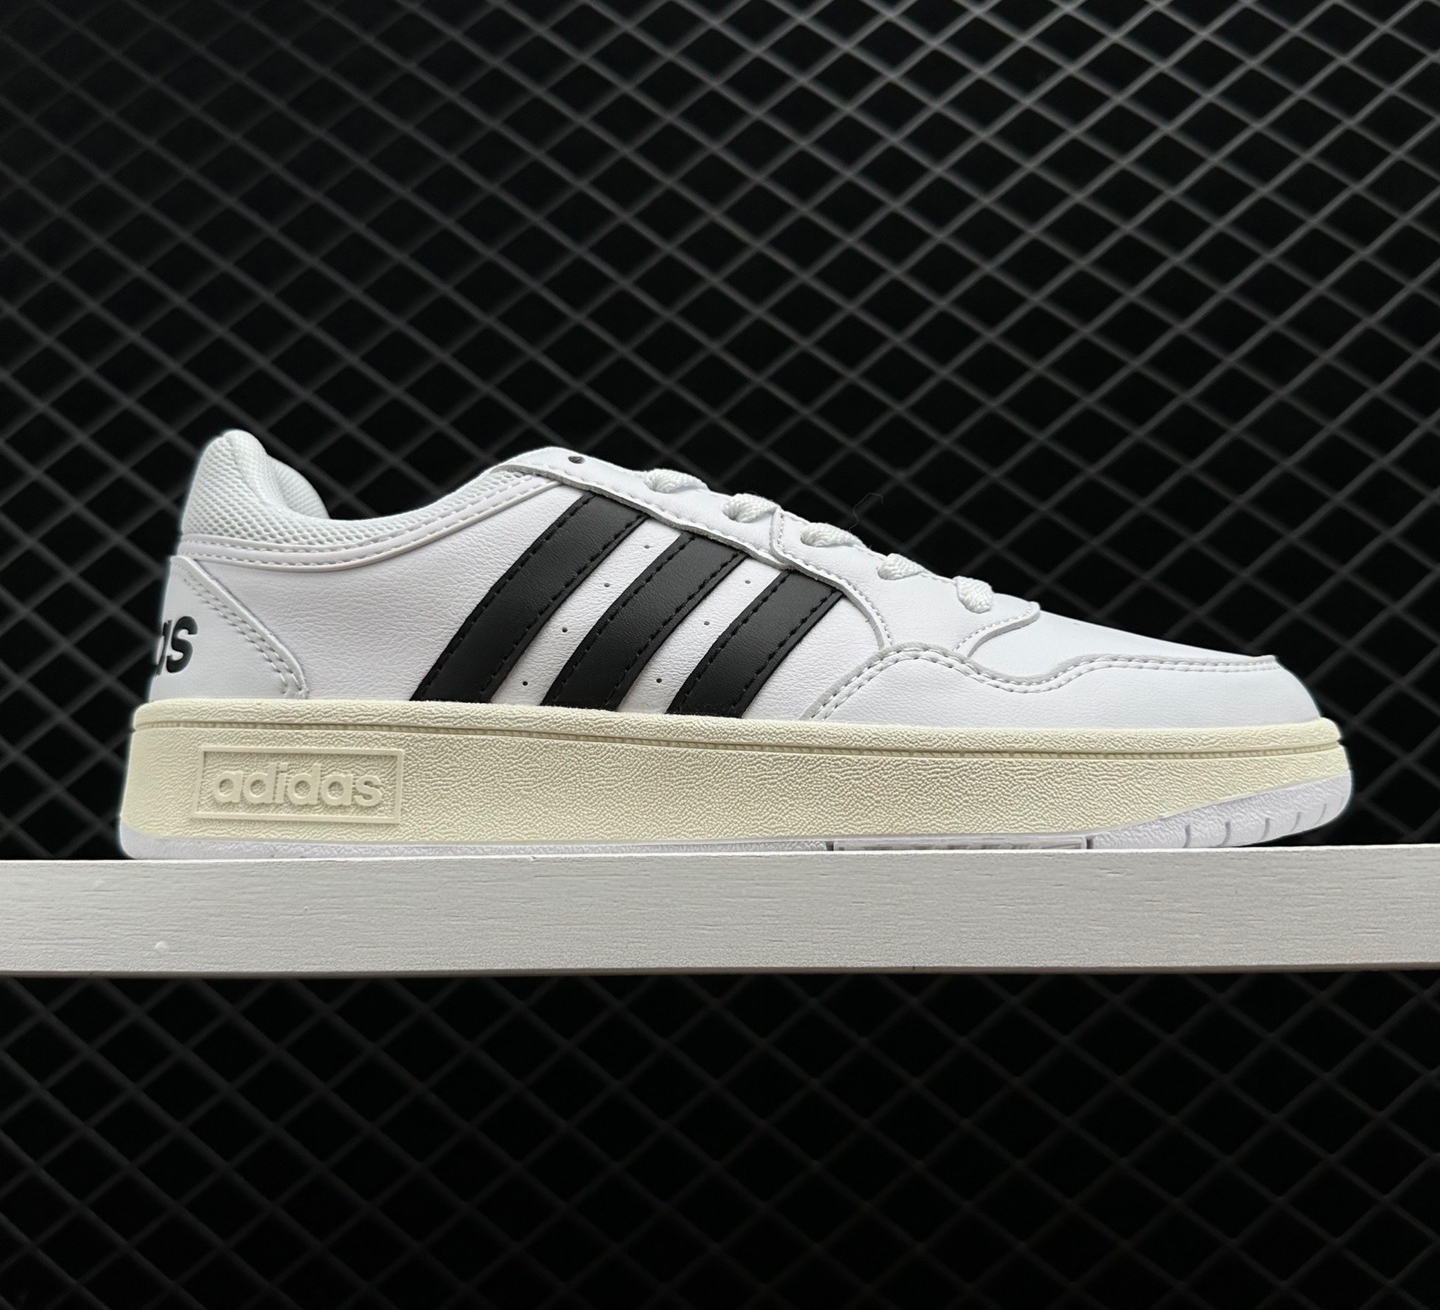 Adidas Hoops 3.0 Low Classic Vintage Shoes - White Black GY5434